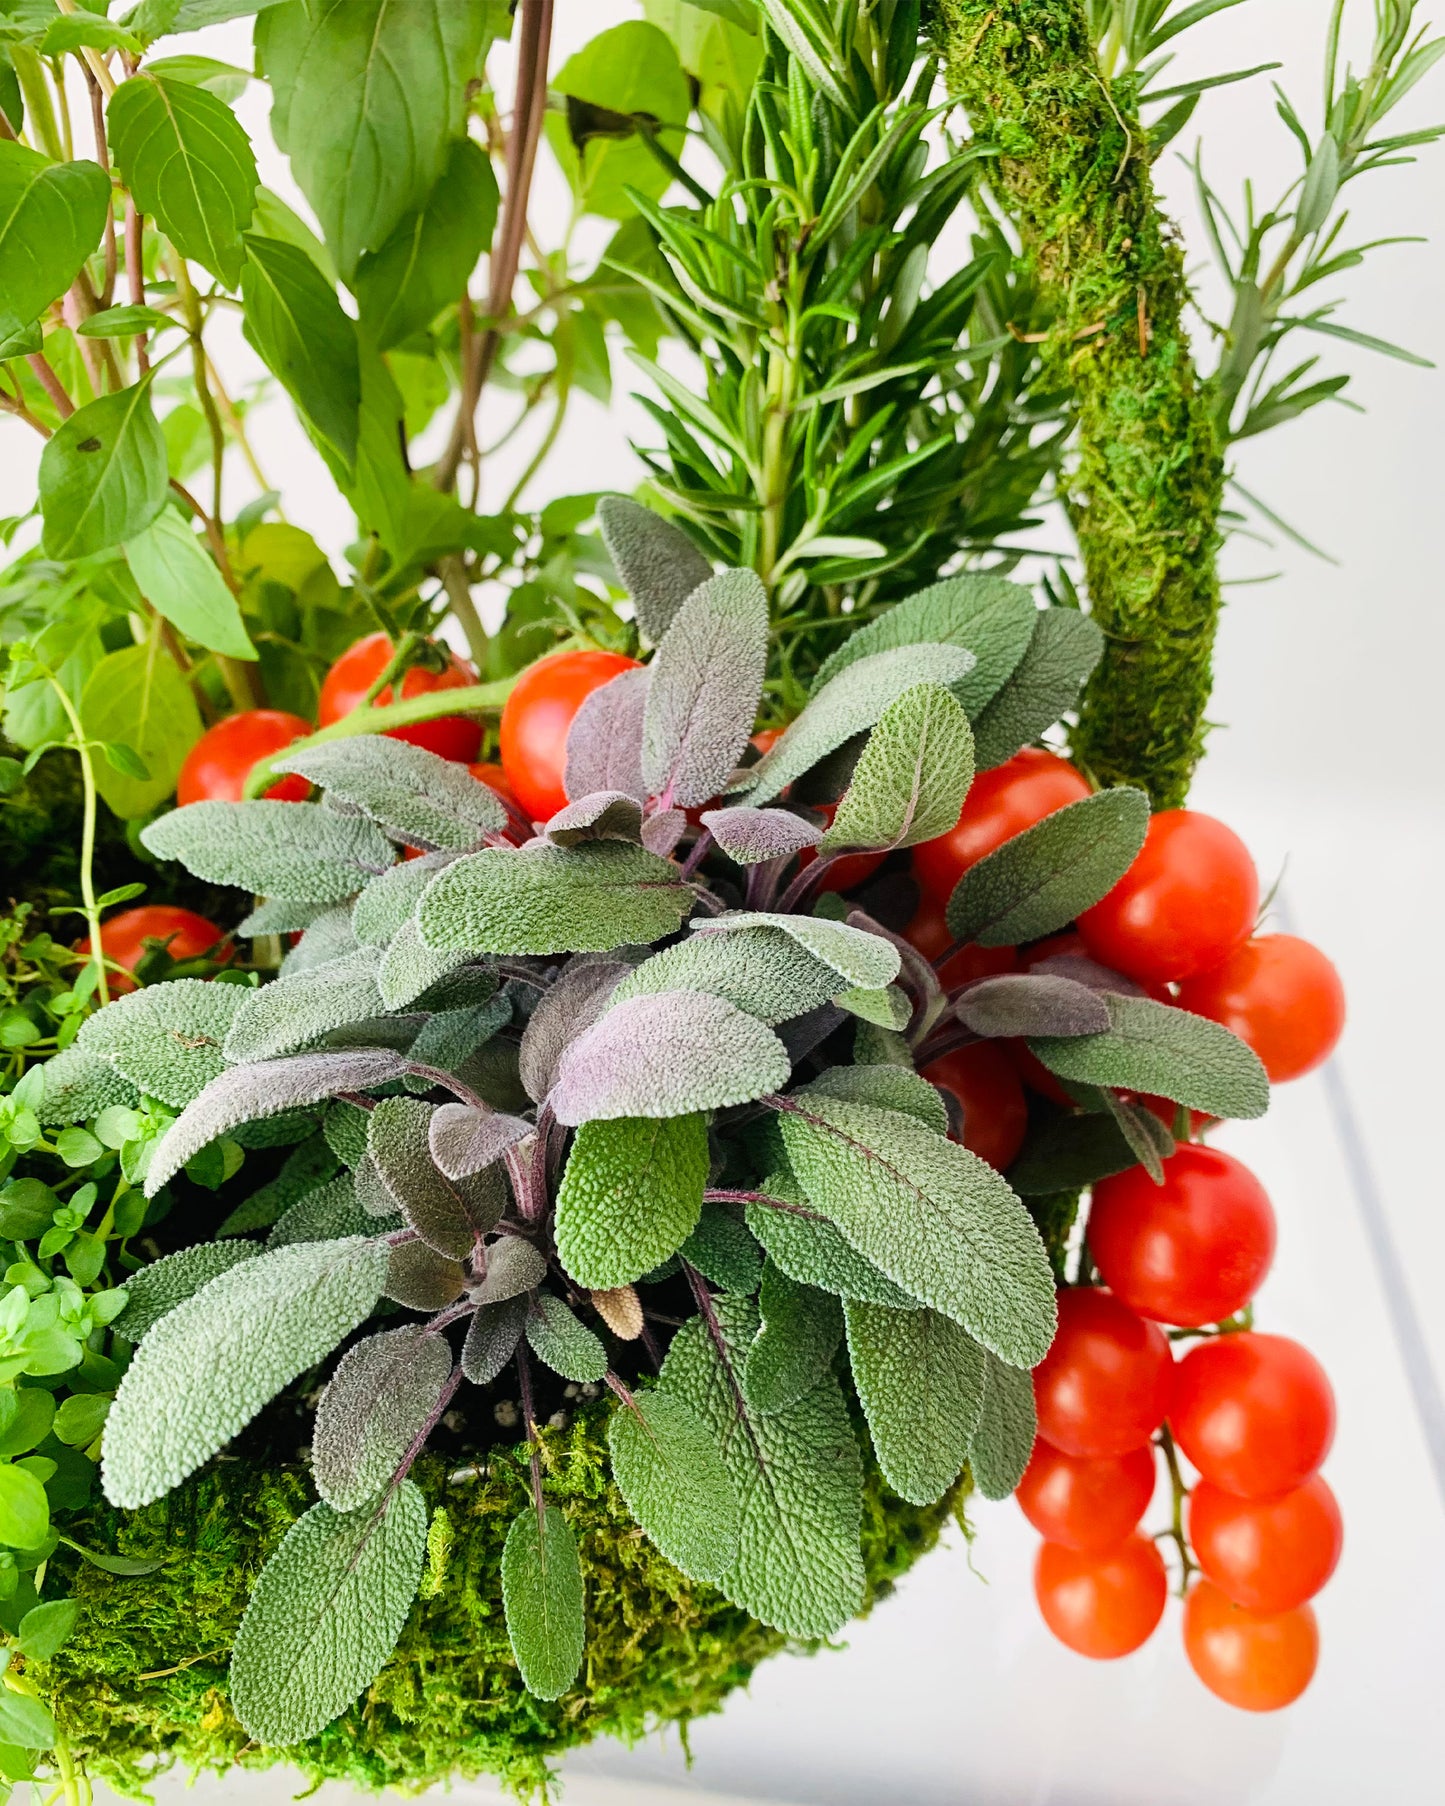 A close up detail of the botanical herb arrangement, featuring vines of cherry tomatoes, rosemary, sage, thyme, purple basil and lemon mint.